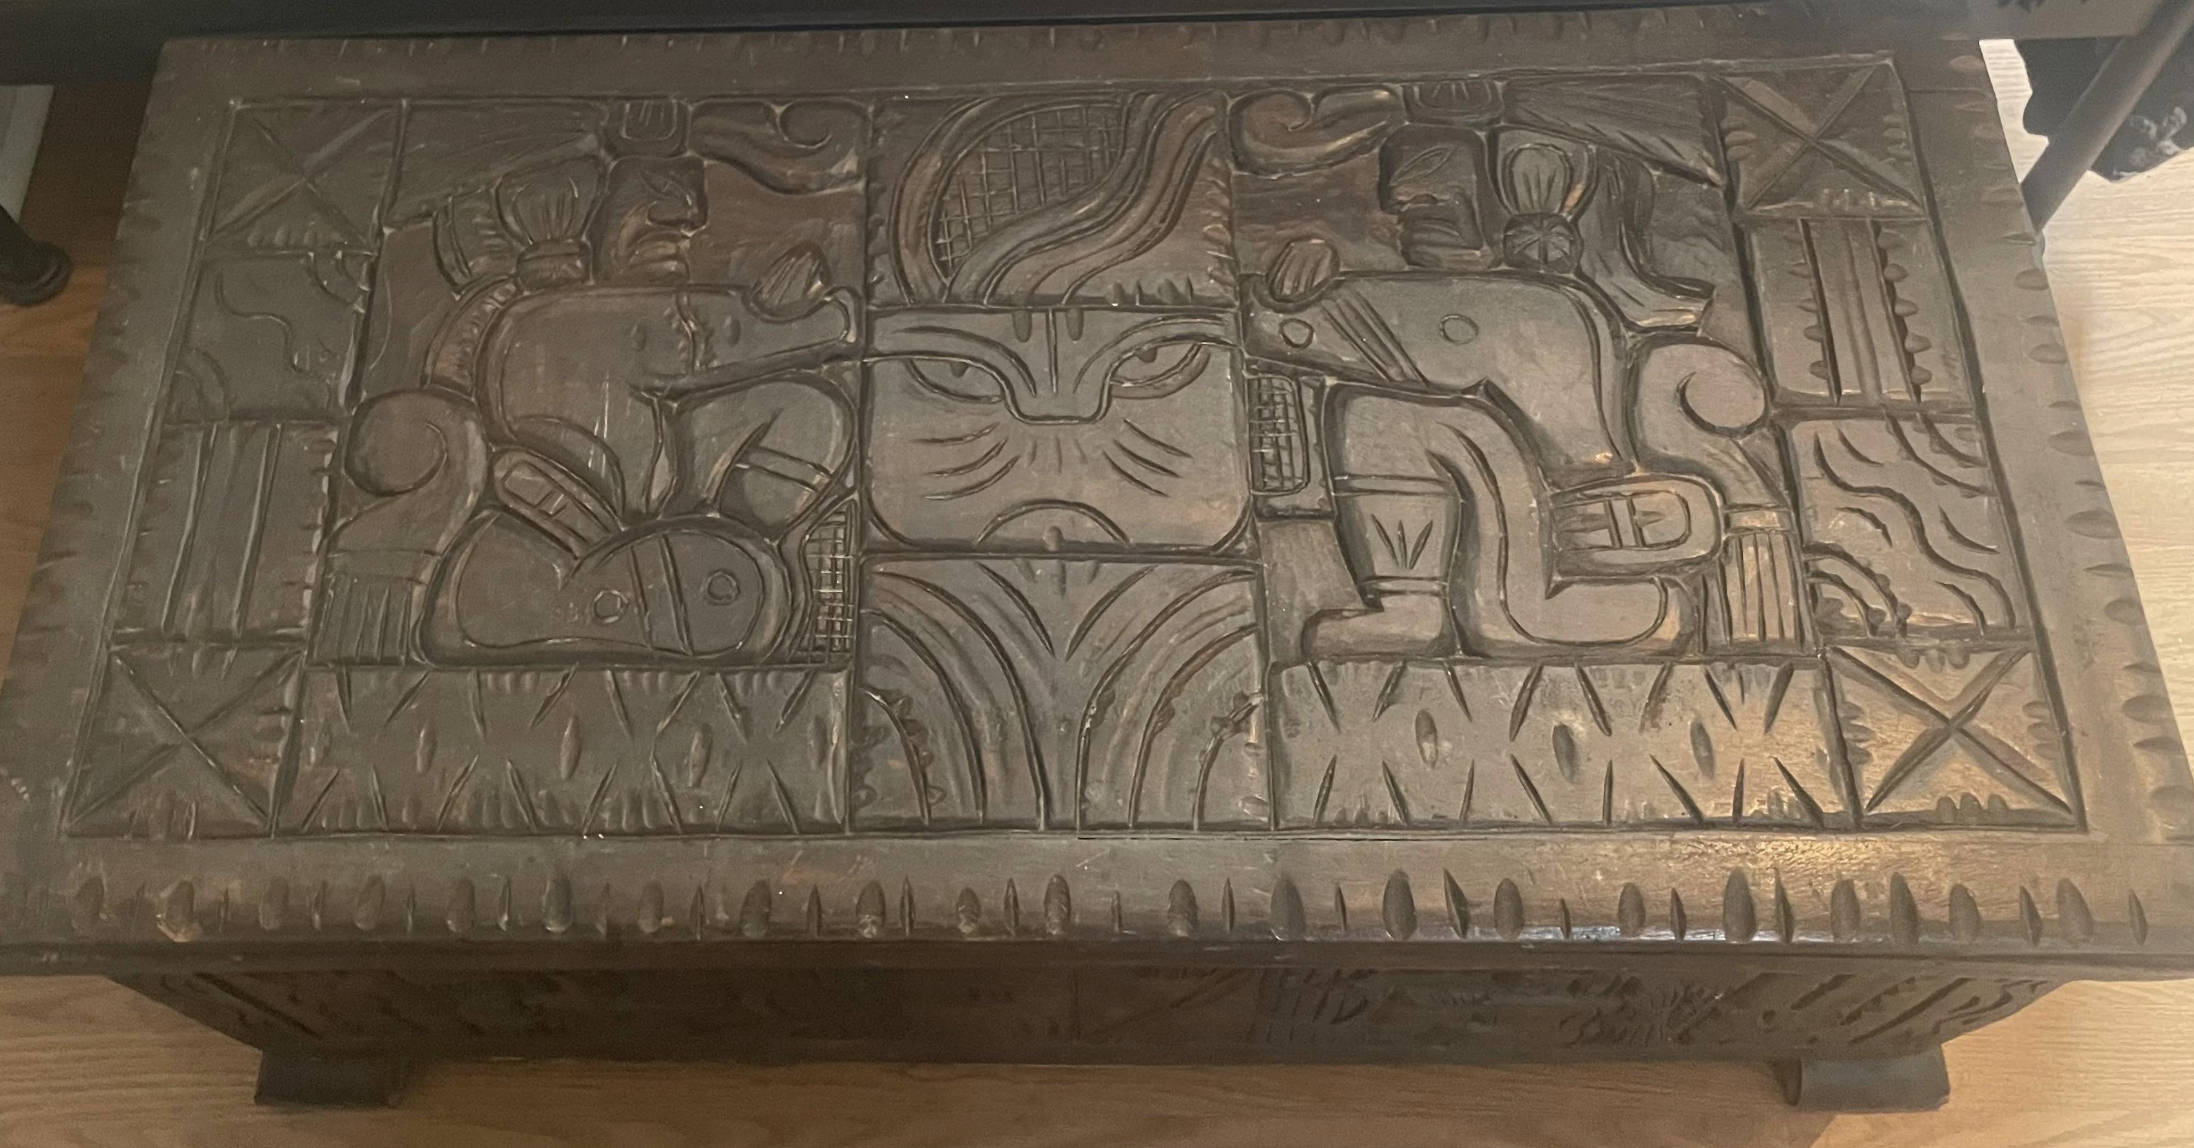 Carved wooden chest with intricate designs and animals, displayed indoors as a unique furniture piece